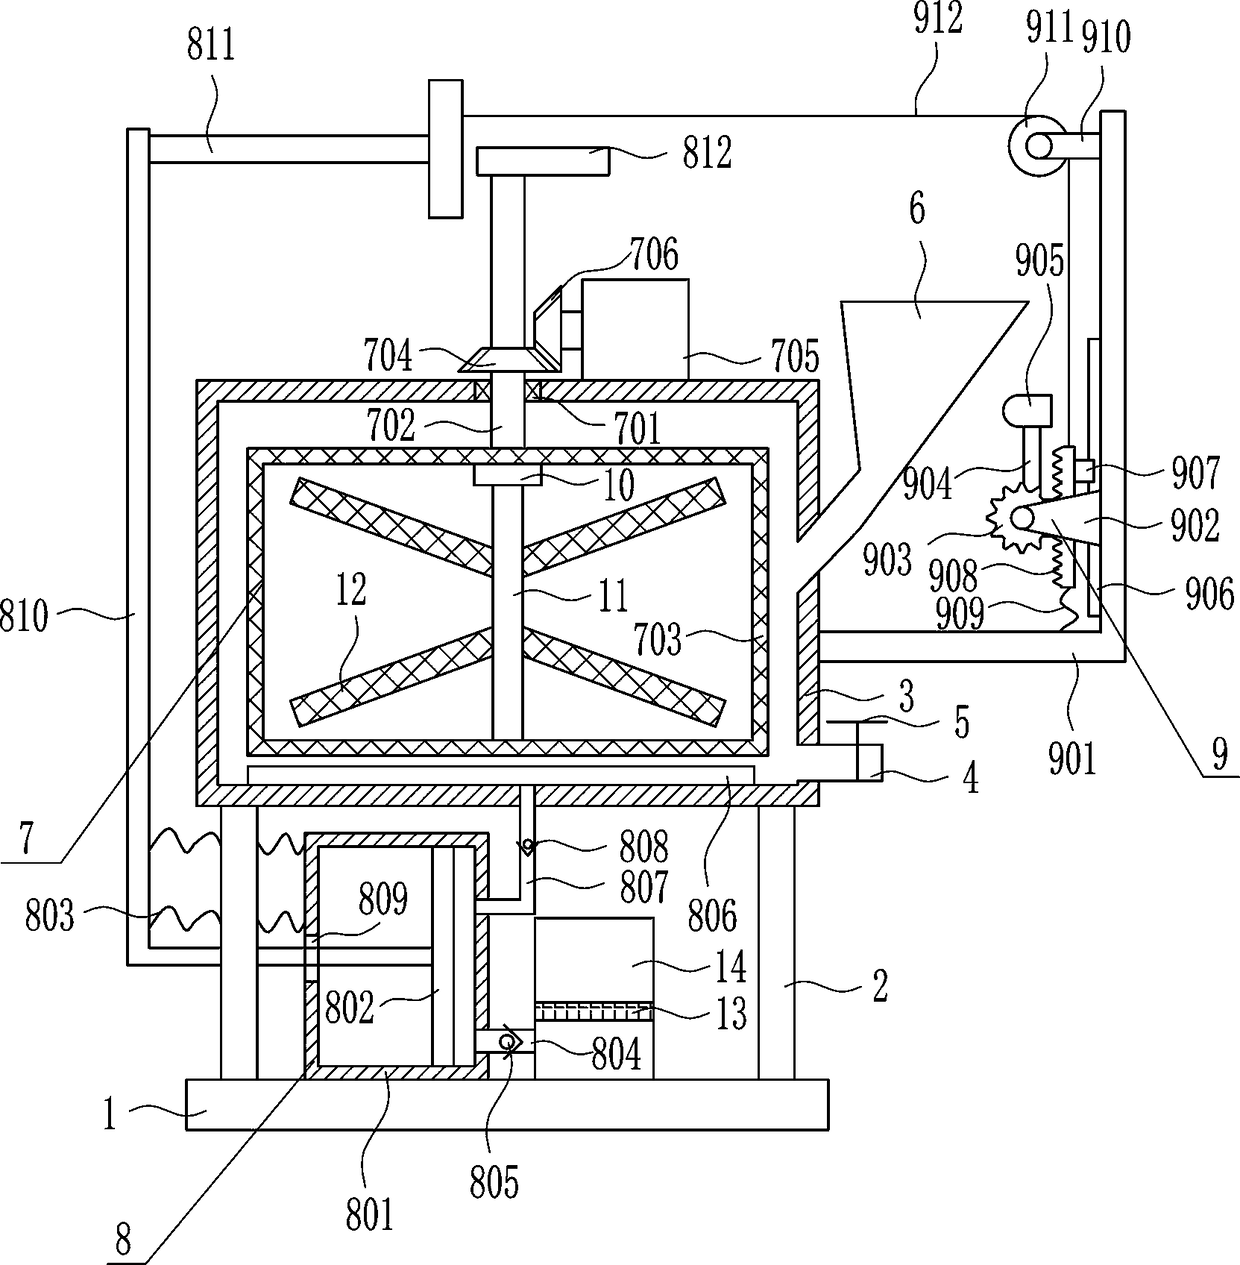 Chemical dye compounding device